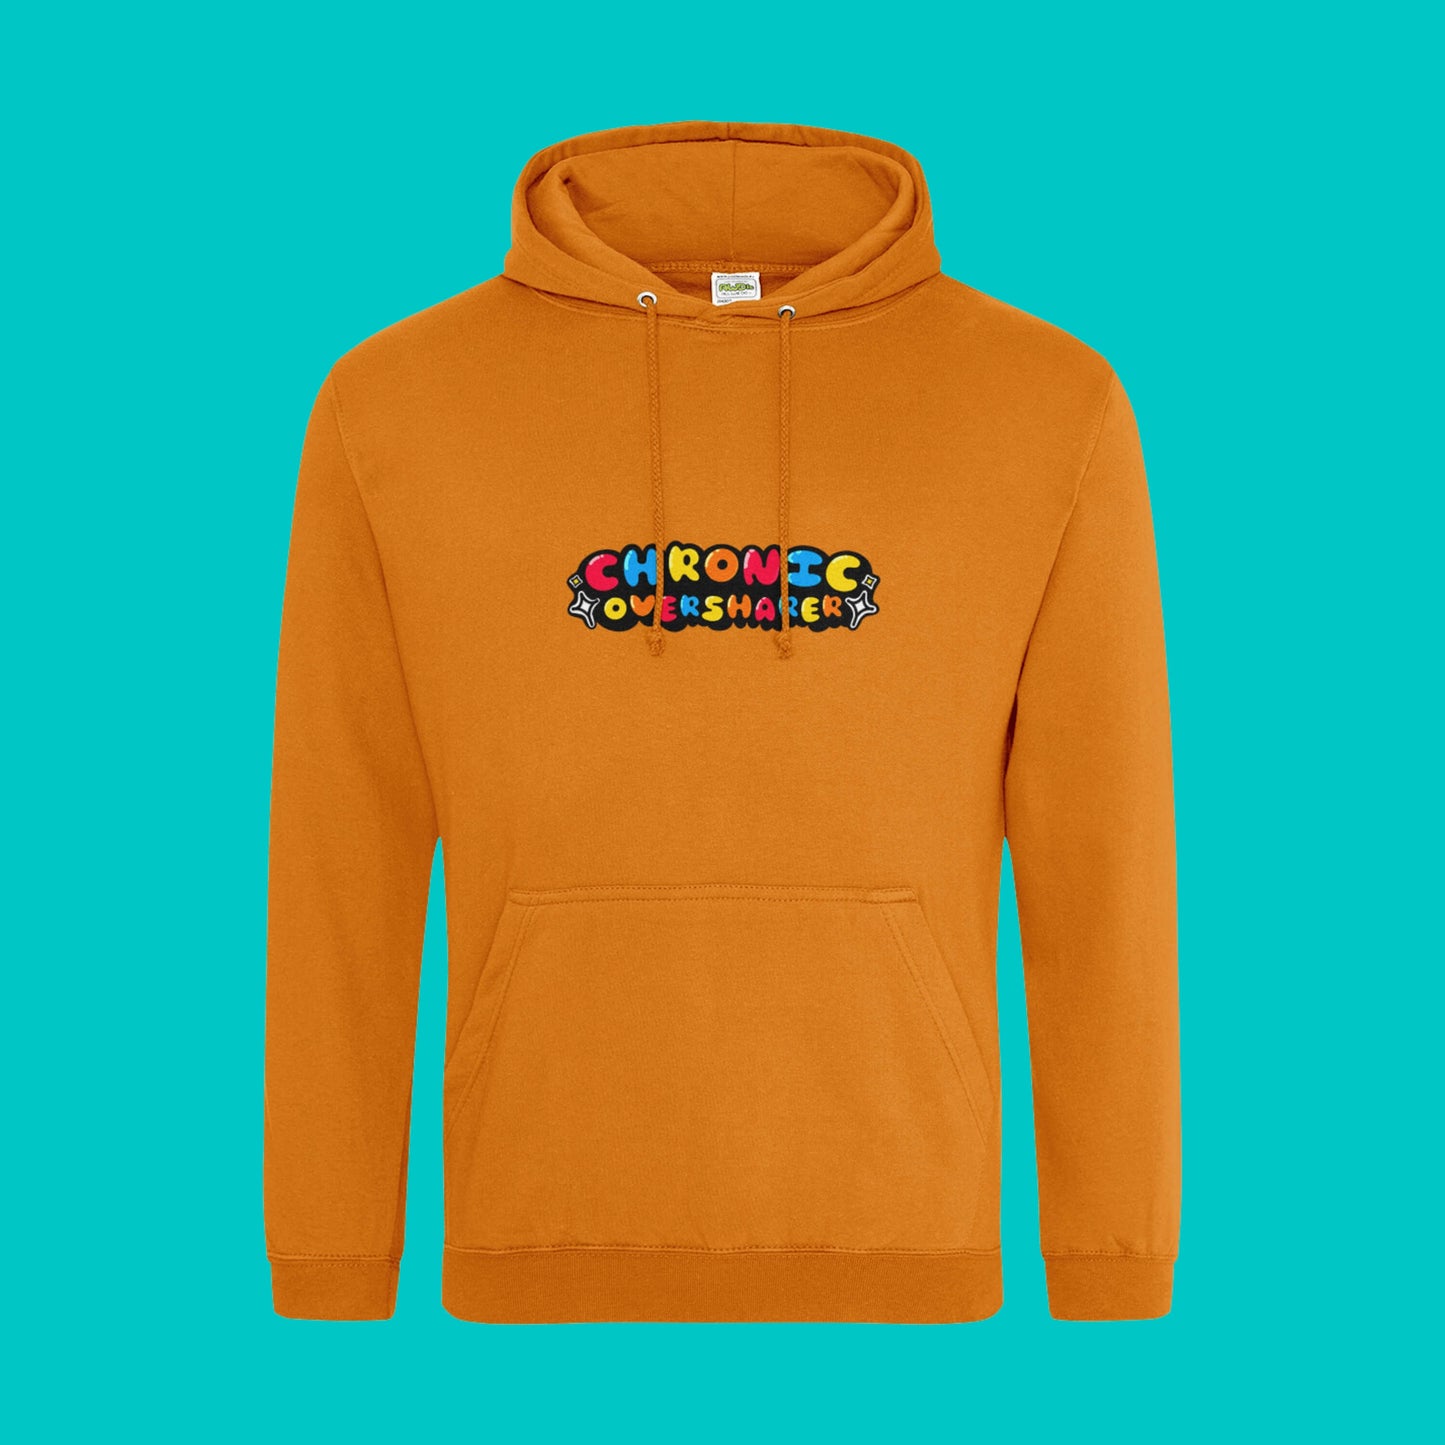 The Chronic Over Sharer Pumpkin Orange Hoodie shown on a blue background. The Pumpkin Orange hoodie features a drawstring hood, a large front pocket and the text 'chronic oversharer' in rainbow bubble font with a black shadow effect and white sparkles. The design was created to raise awareness for neurodivergent disorders such as ADHD.